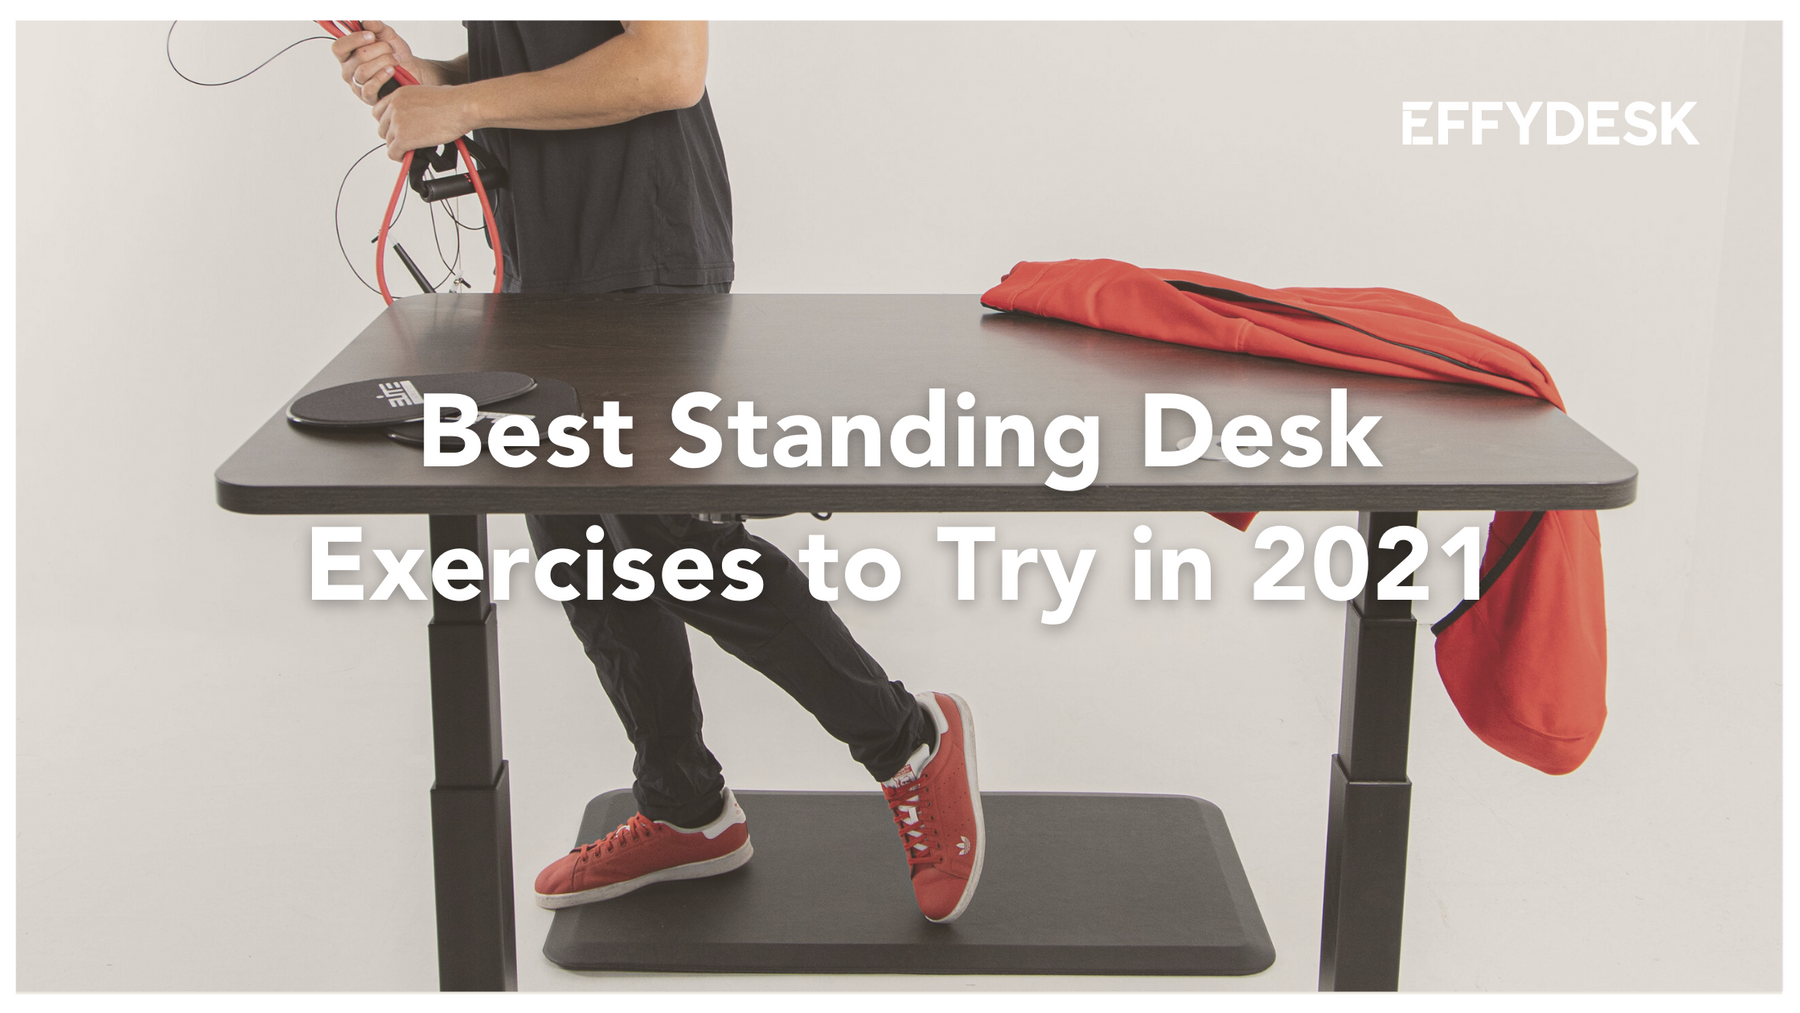 Lots of exercises that you can work with your standing desk